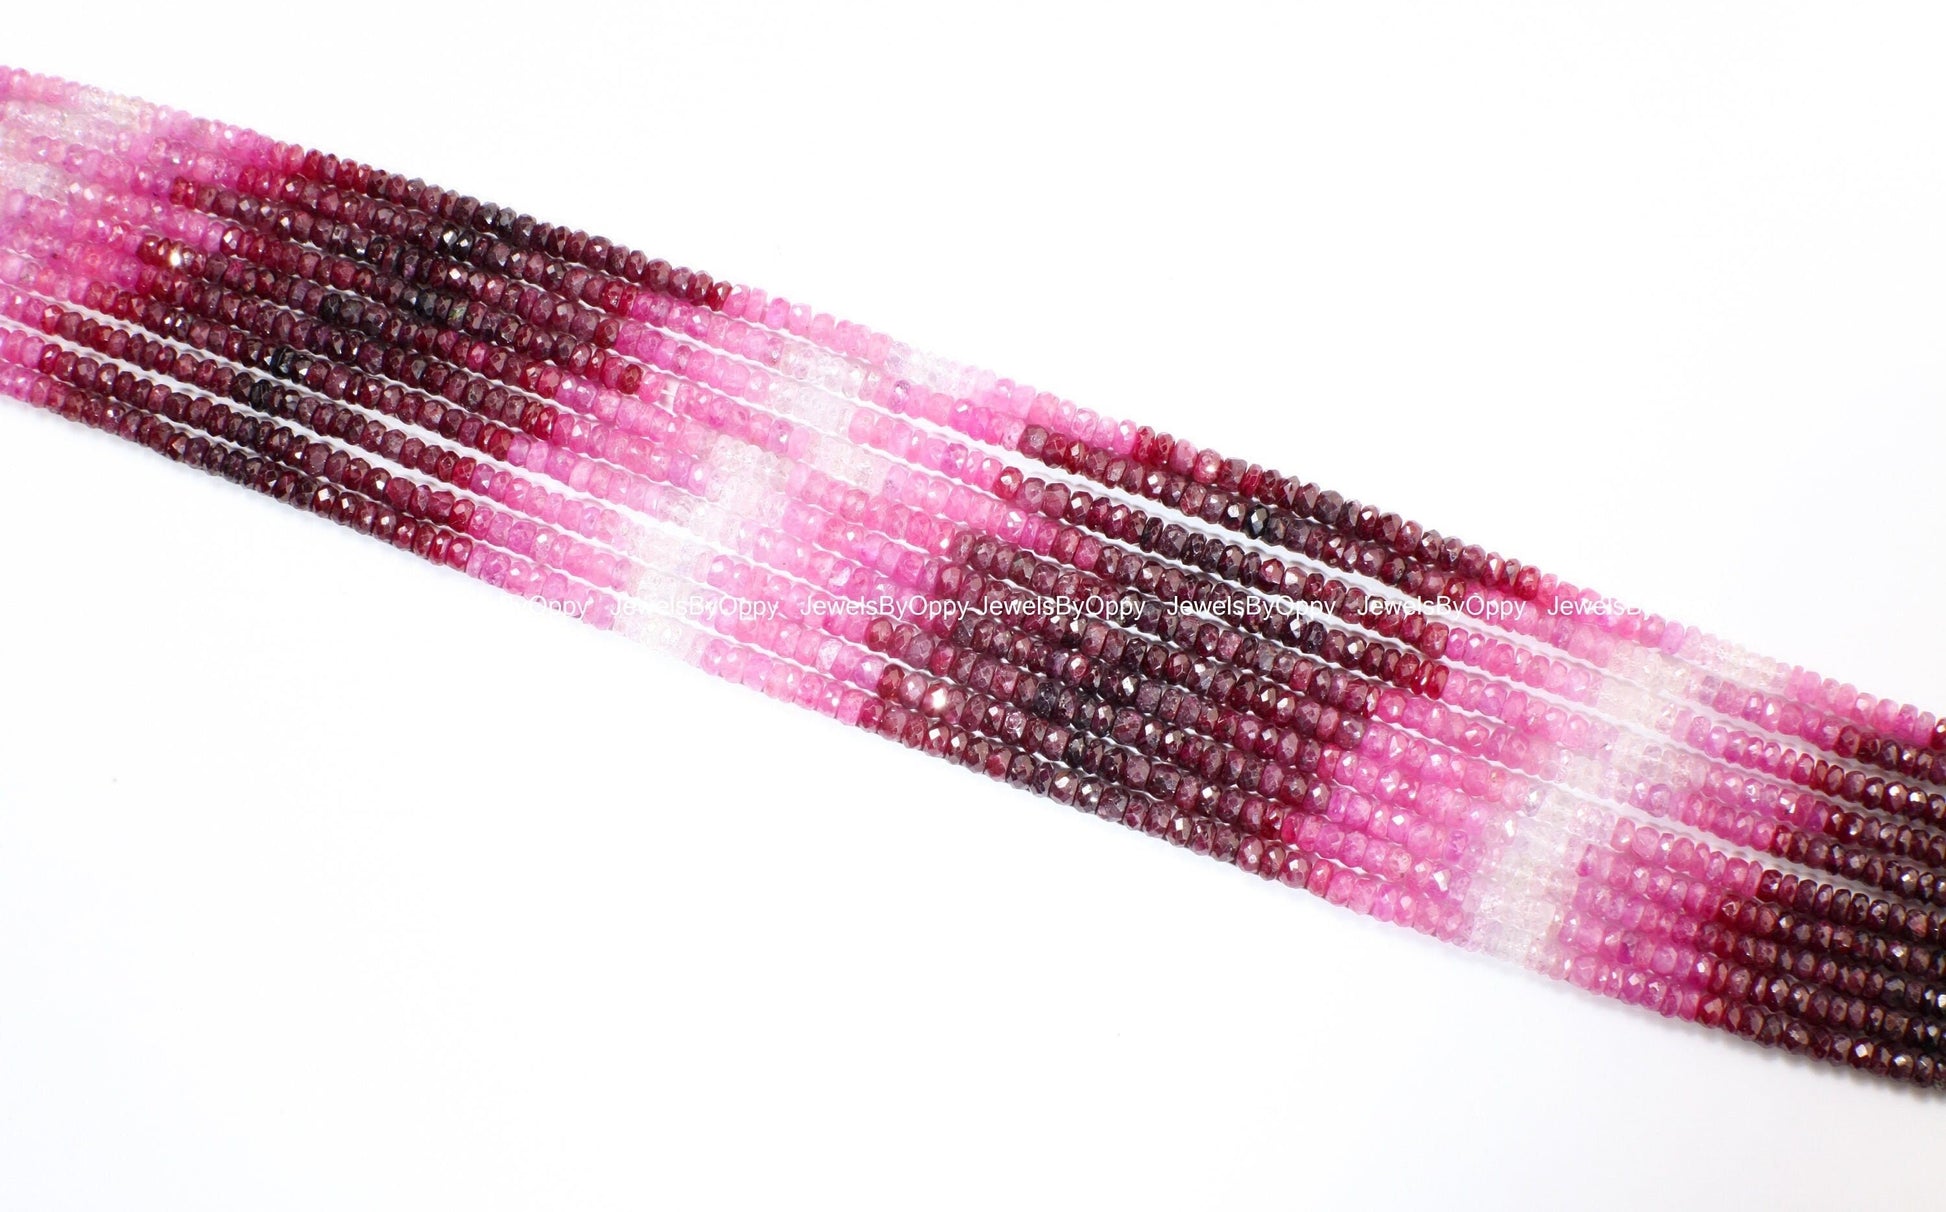 Ombre Ruby Rondelle, Natural Ruby Faceted Ombre Shaded Roundel Gemstone Beads for jewelry Making, Bracelet, Necklace, Earrings